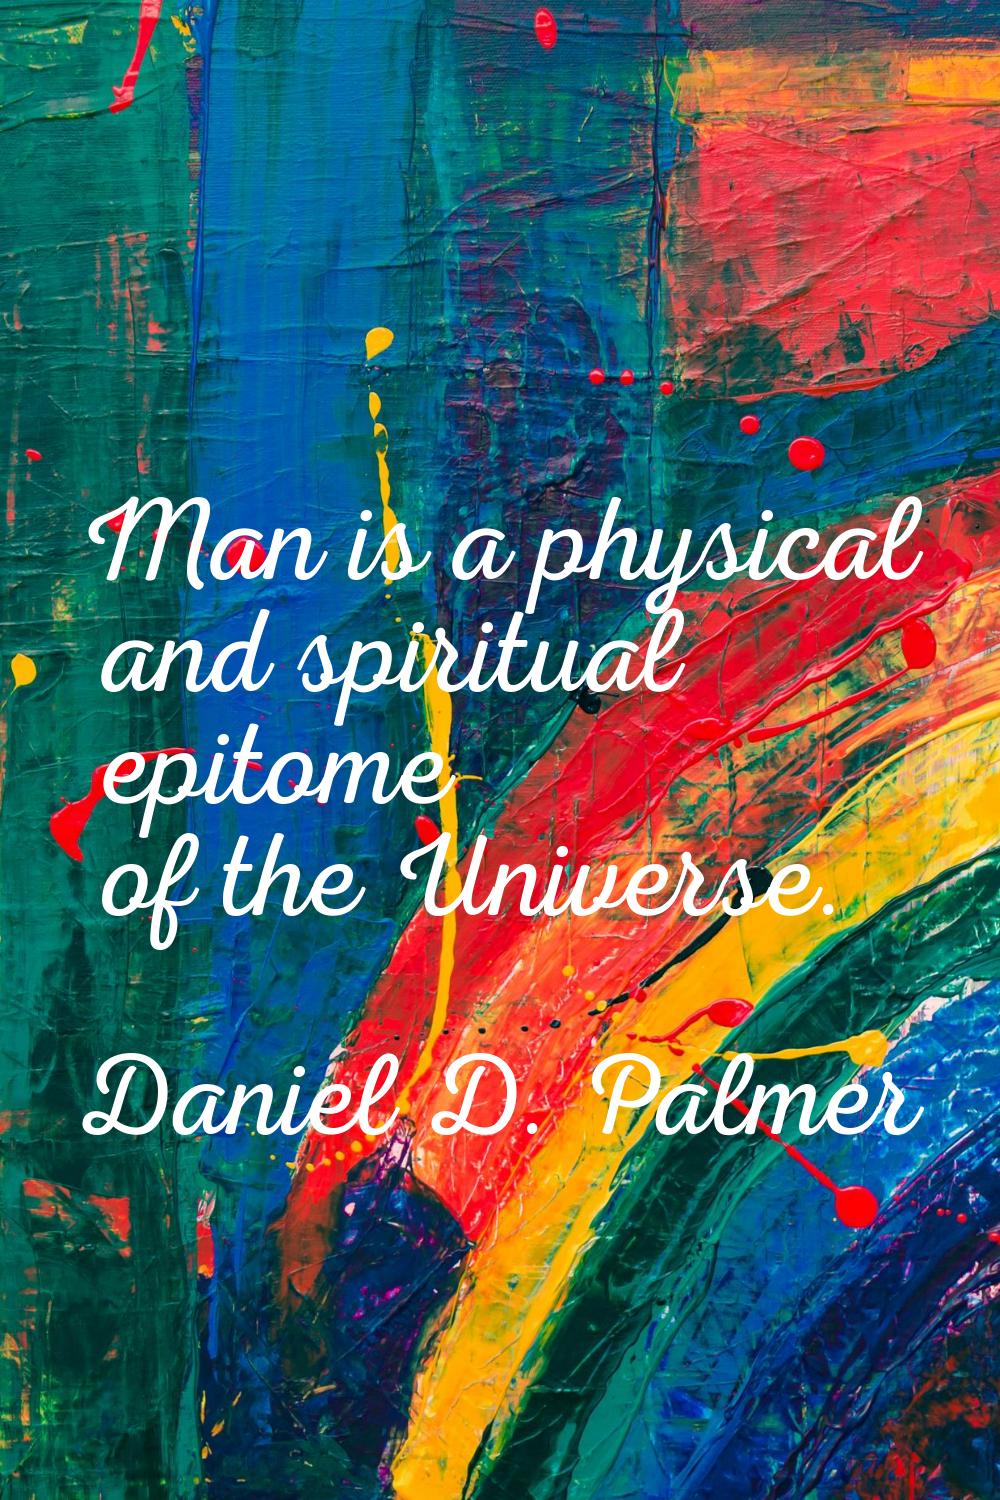 Man is a physical and spiritual epitome of the Universe.